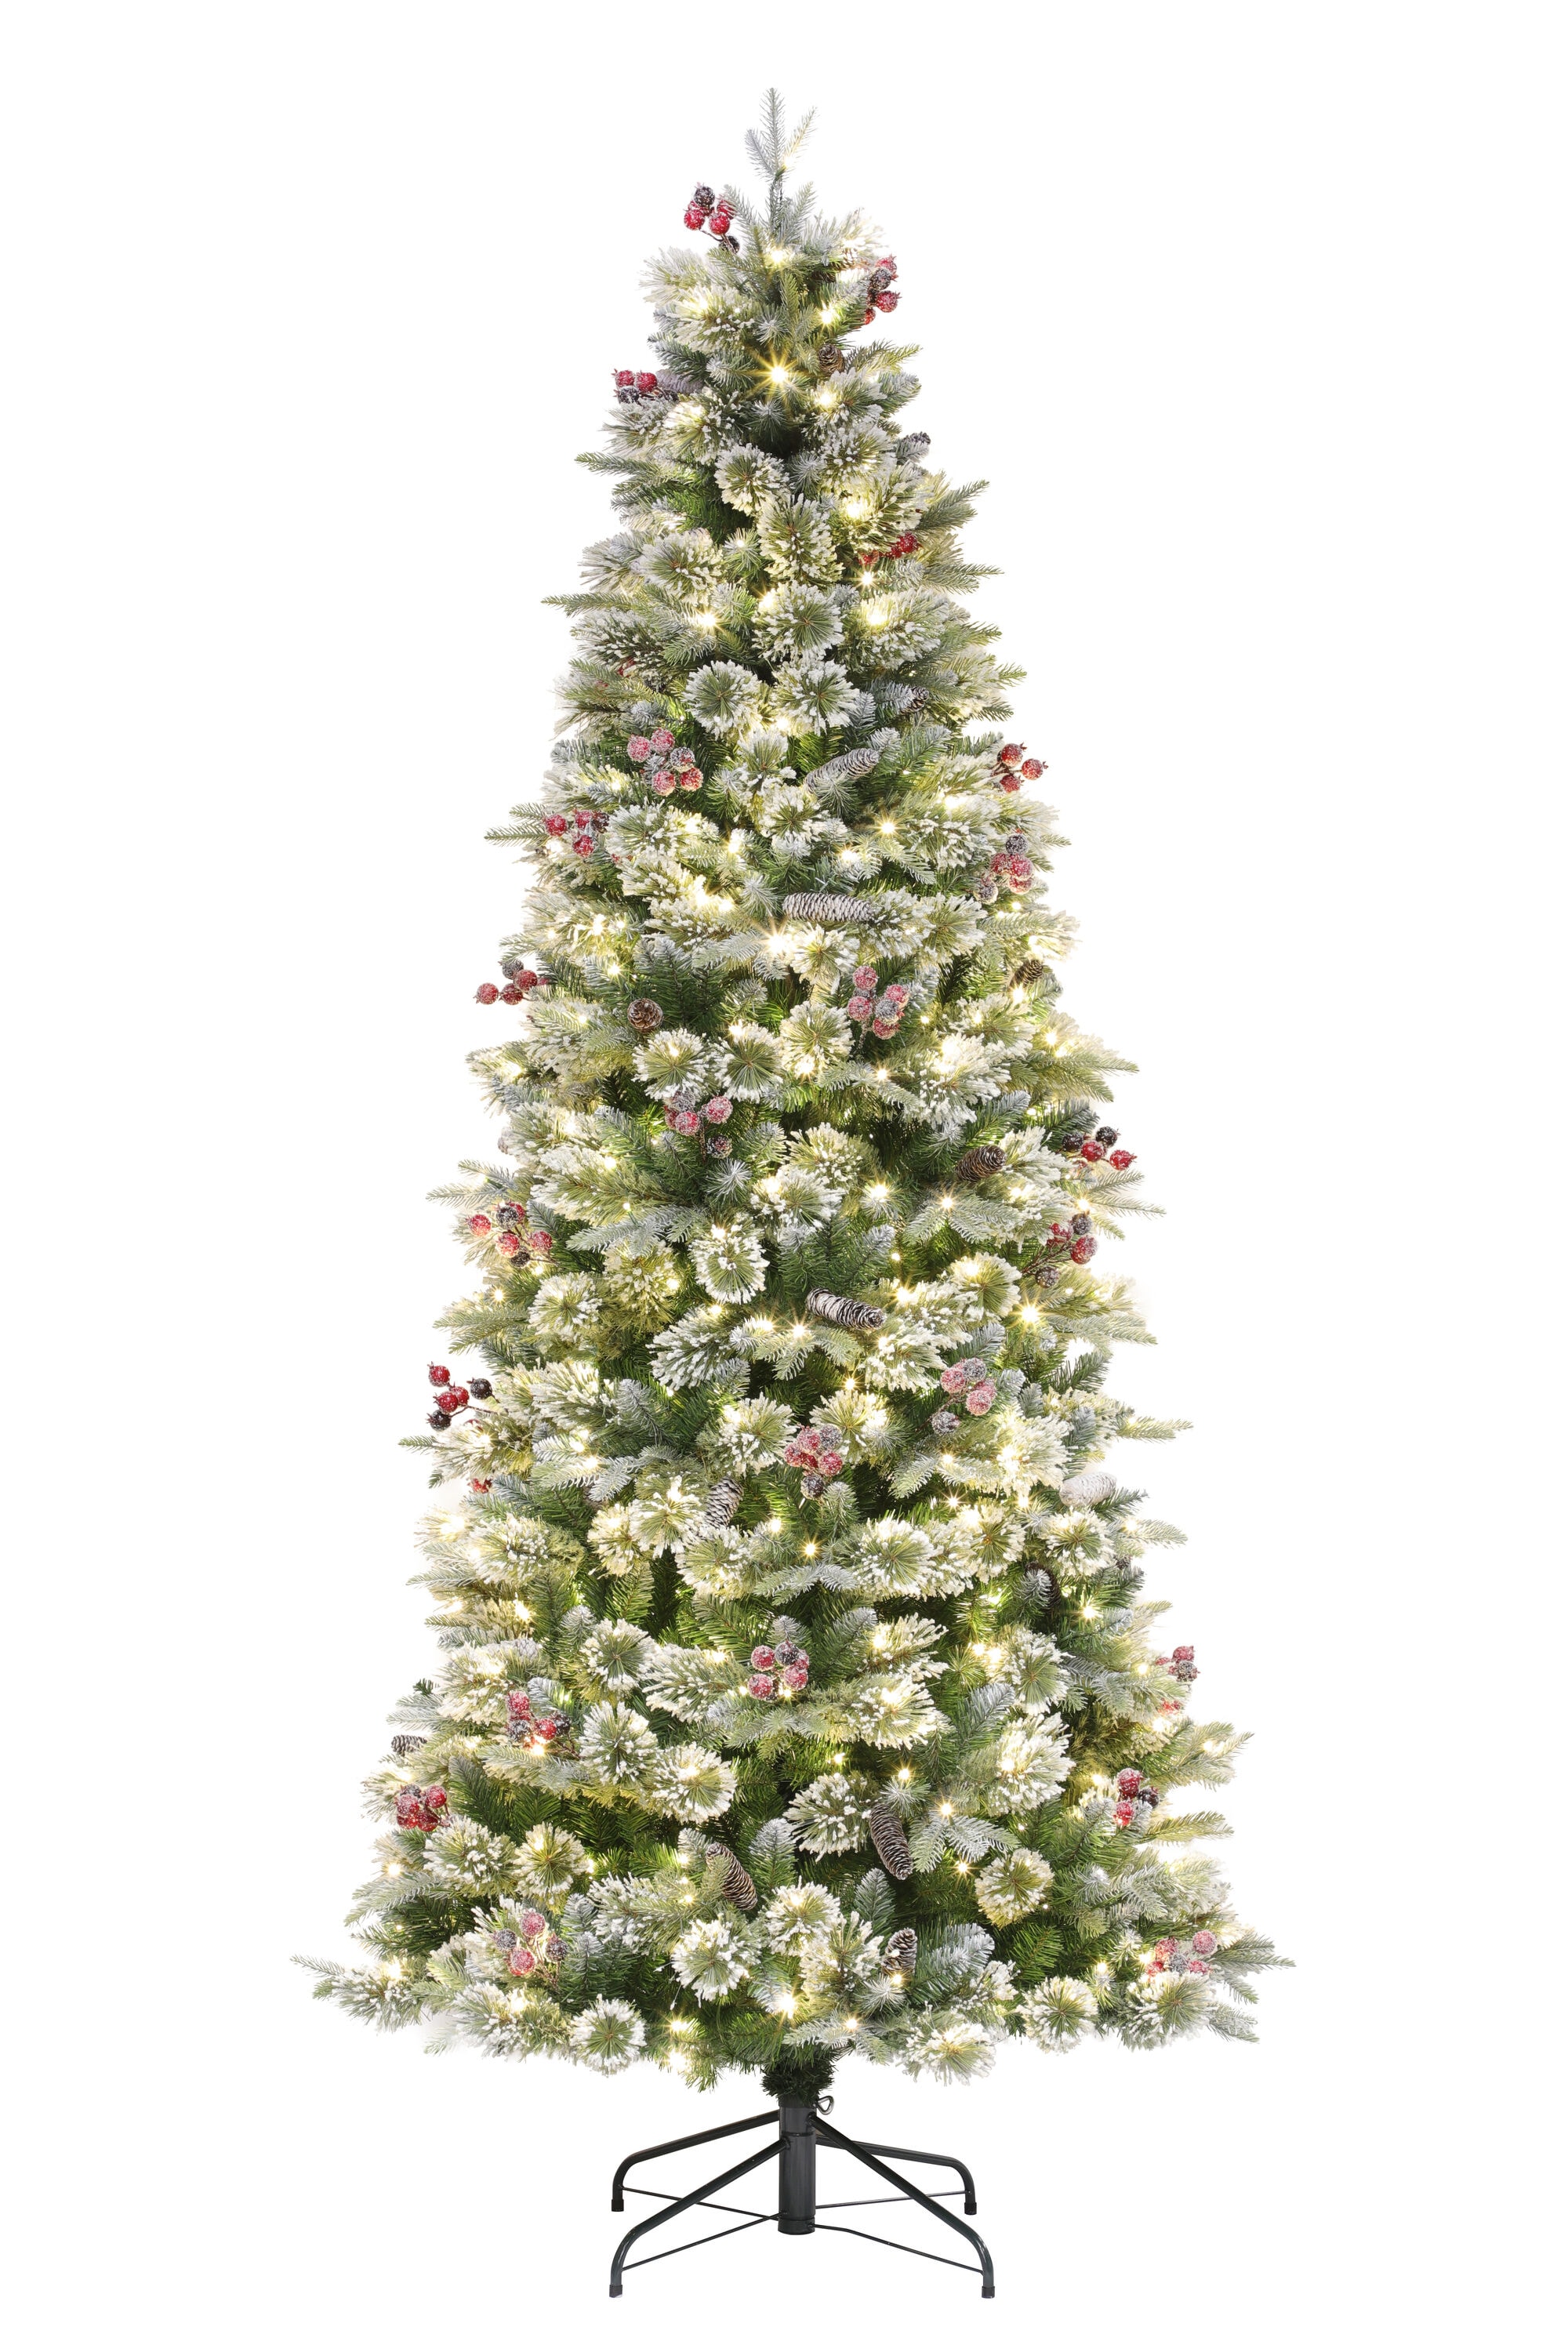 Green Realistic Fir Flocked/Frosted Christmas Tree Size: 7.5' H